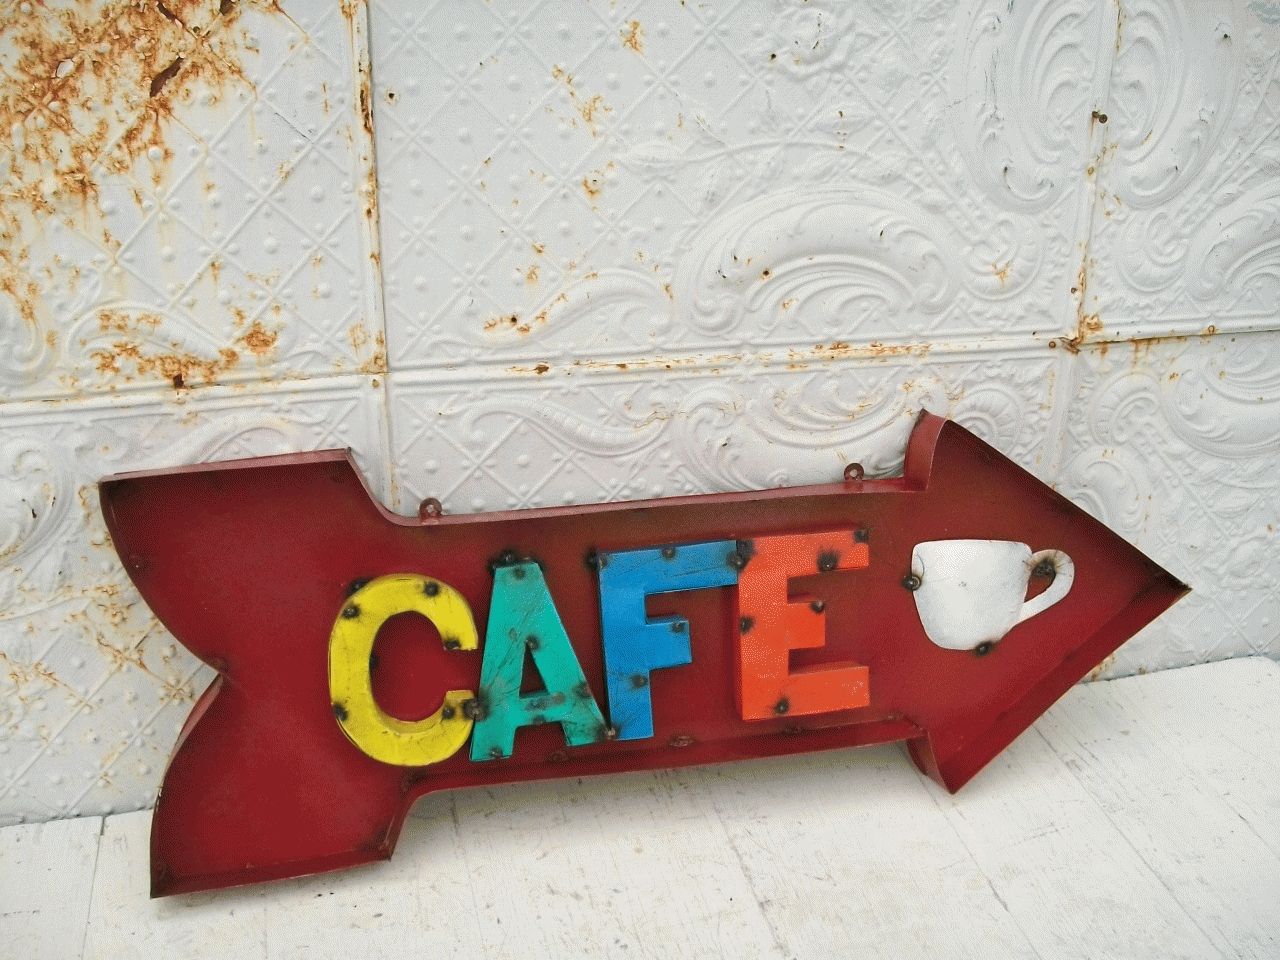 Rustic Metal 3d Cafe Sign Decorative Wall Art Pertaining To Most Up To Date Cafe Metal Wall Art (View 13 of 20)